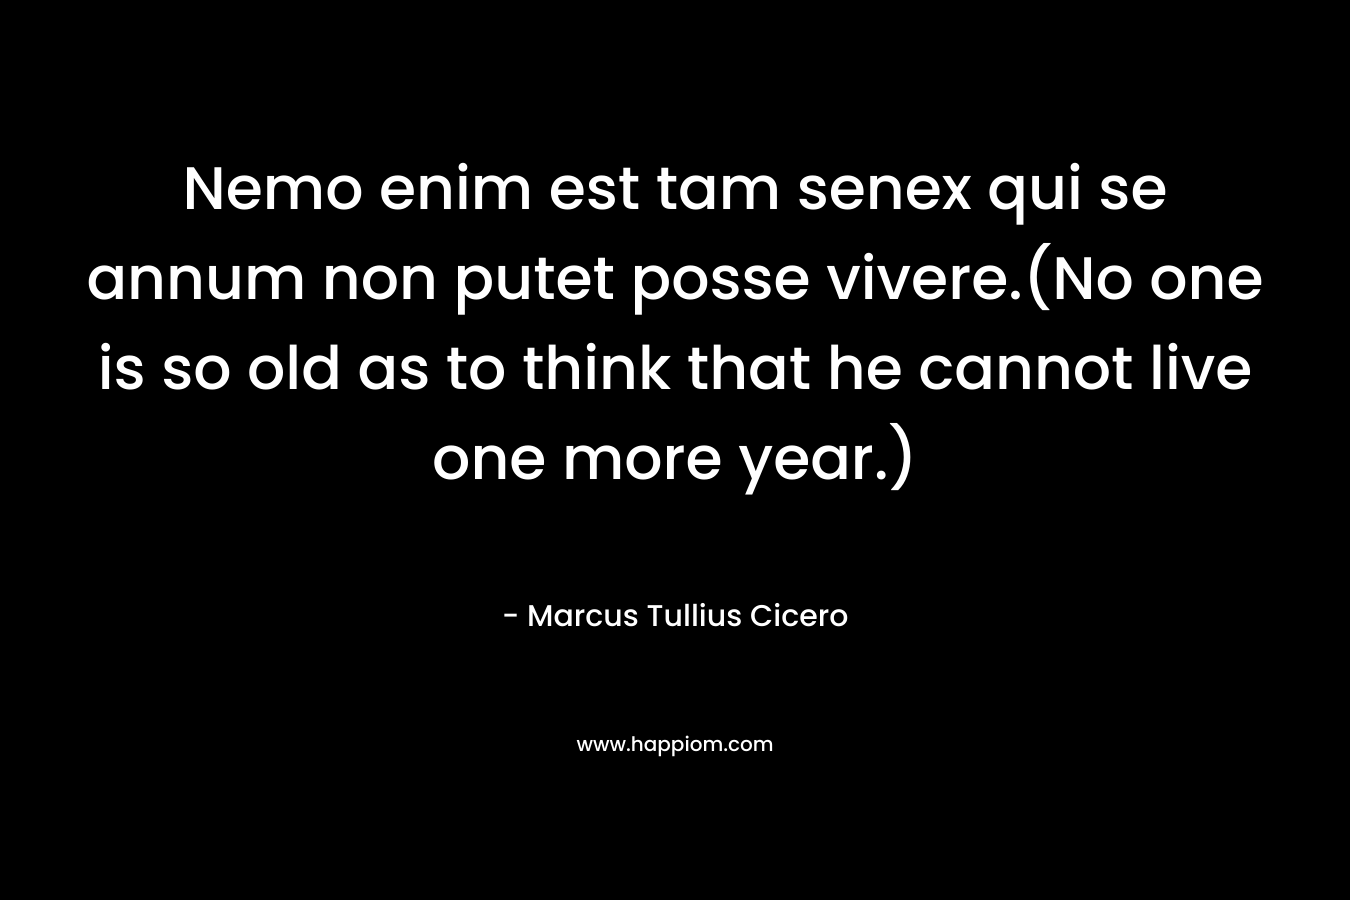 Nemo enim est tam senex qui se annum non putet posse vivere.(No one is so old as to think that he cannot live one more year.)